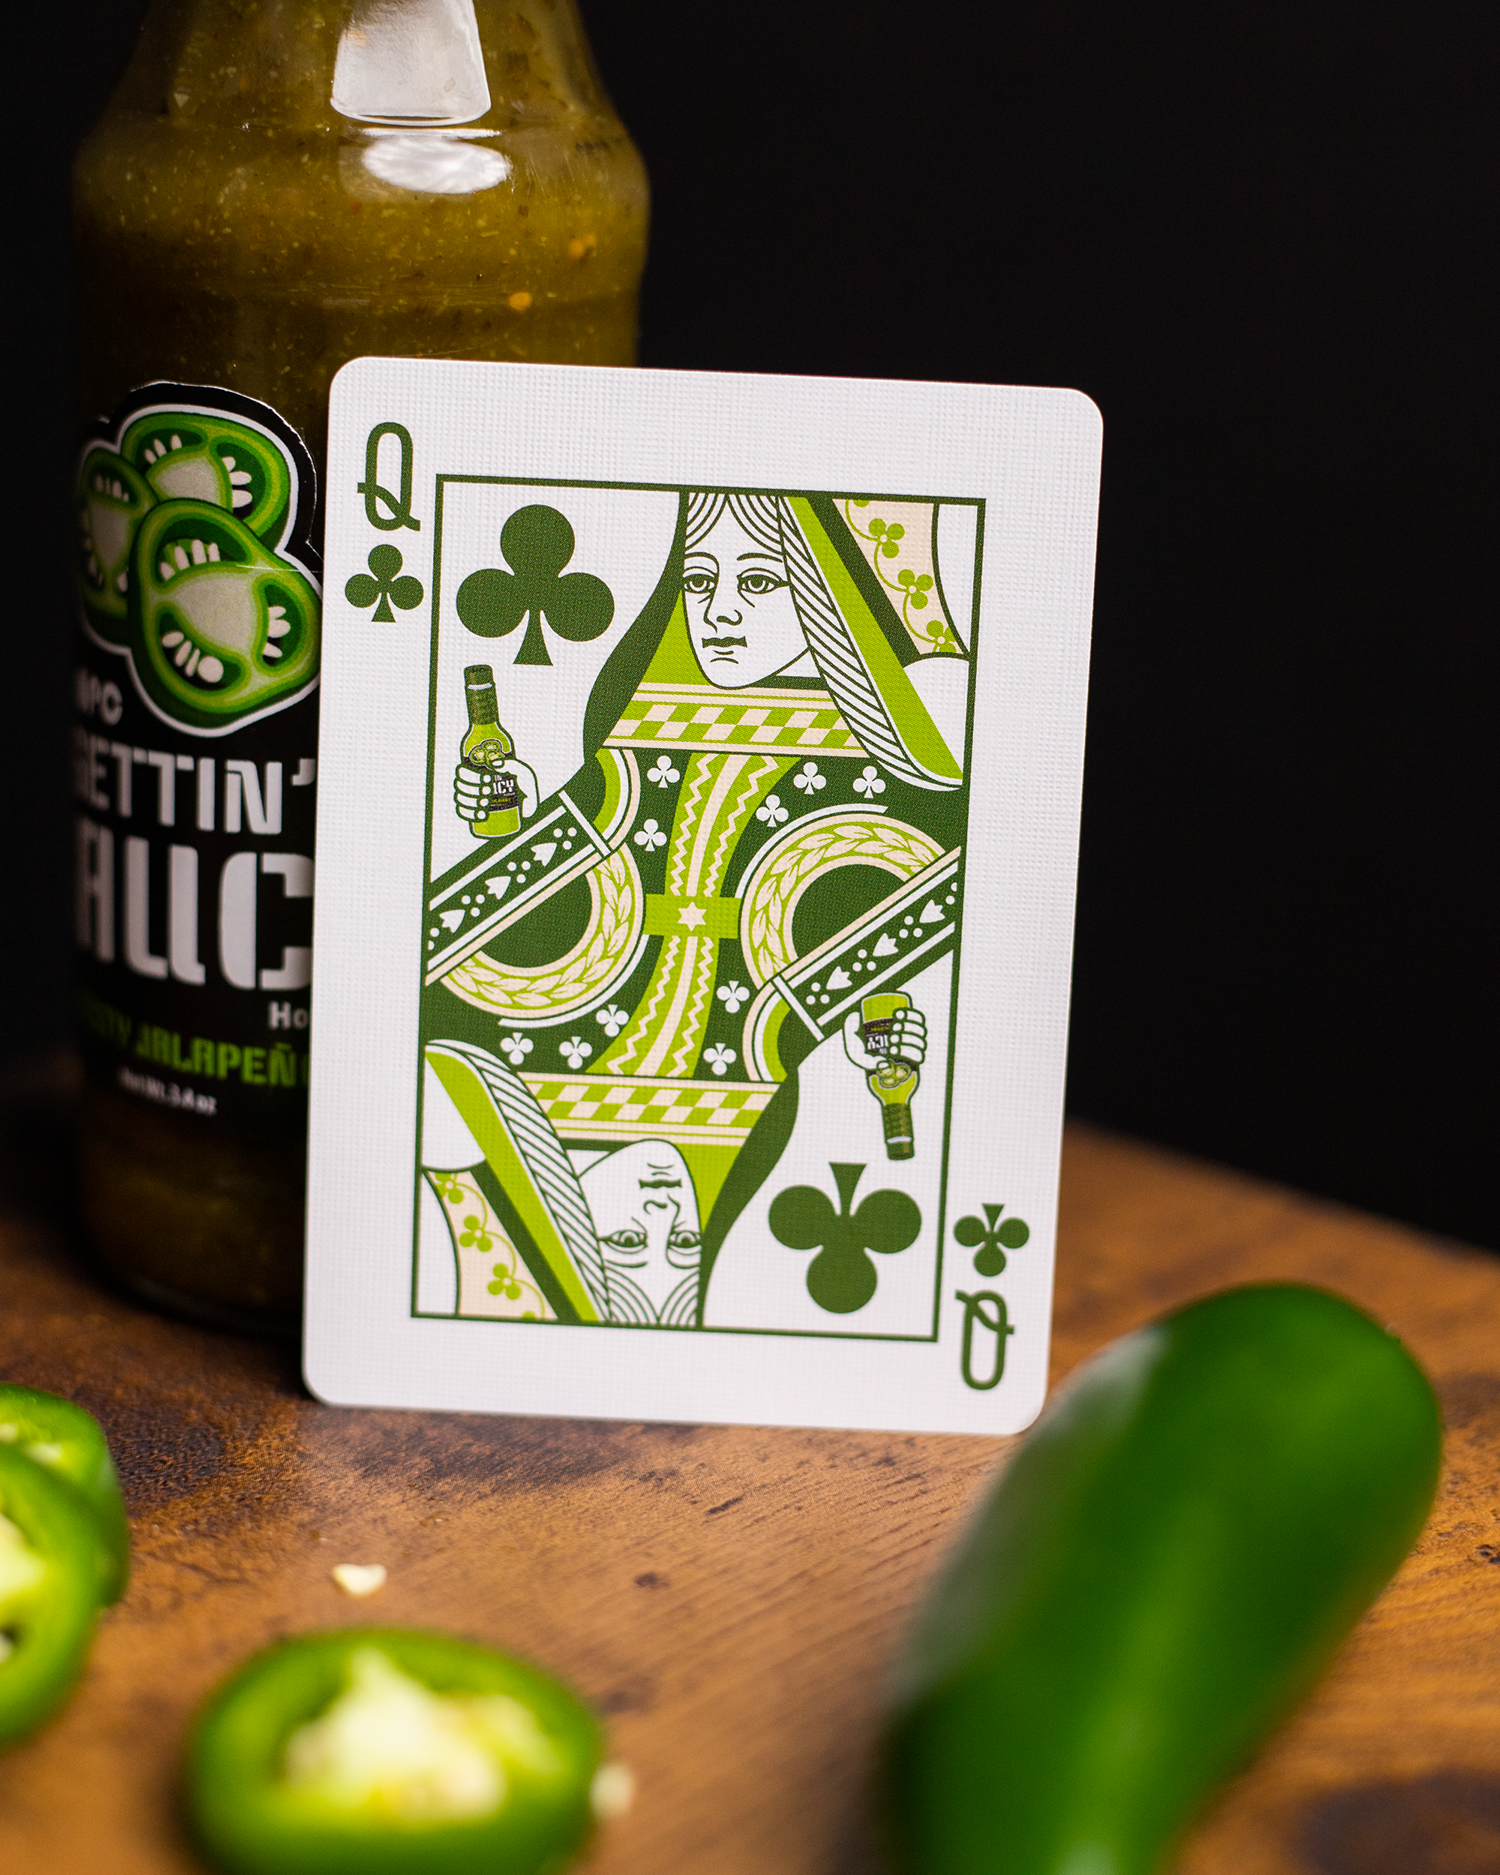 Gettin' Saucy Playing Cards